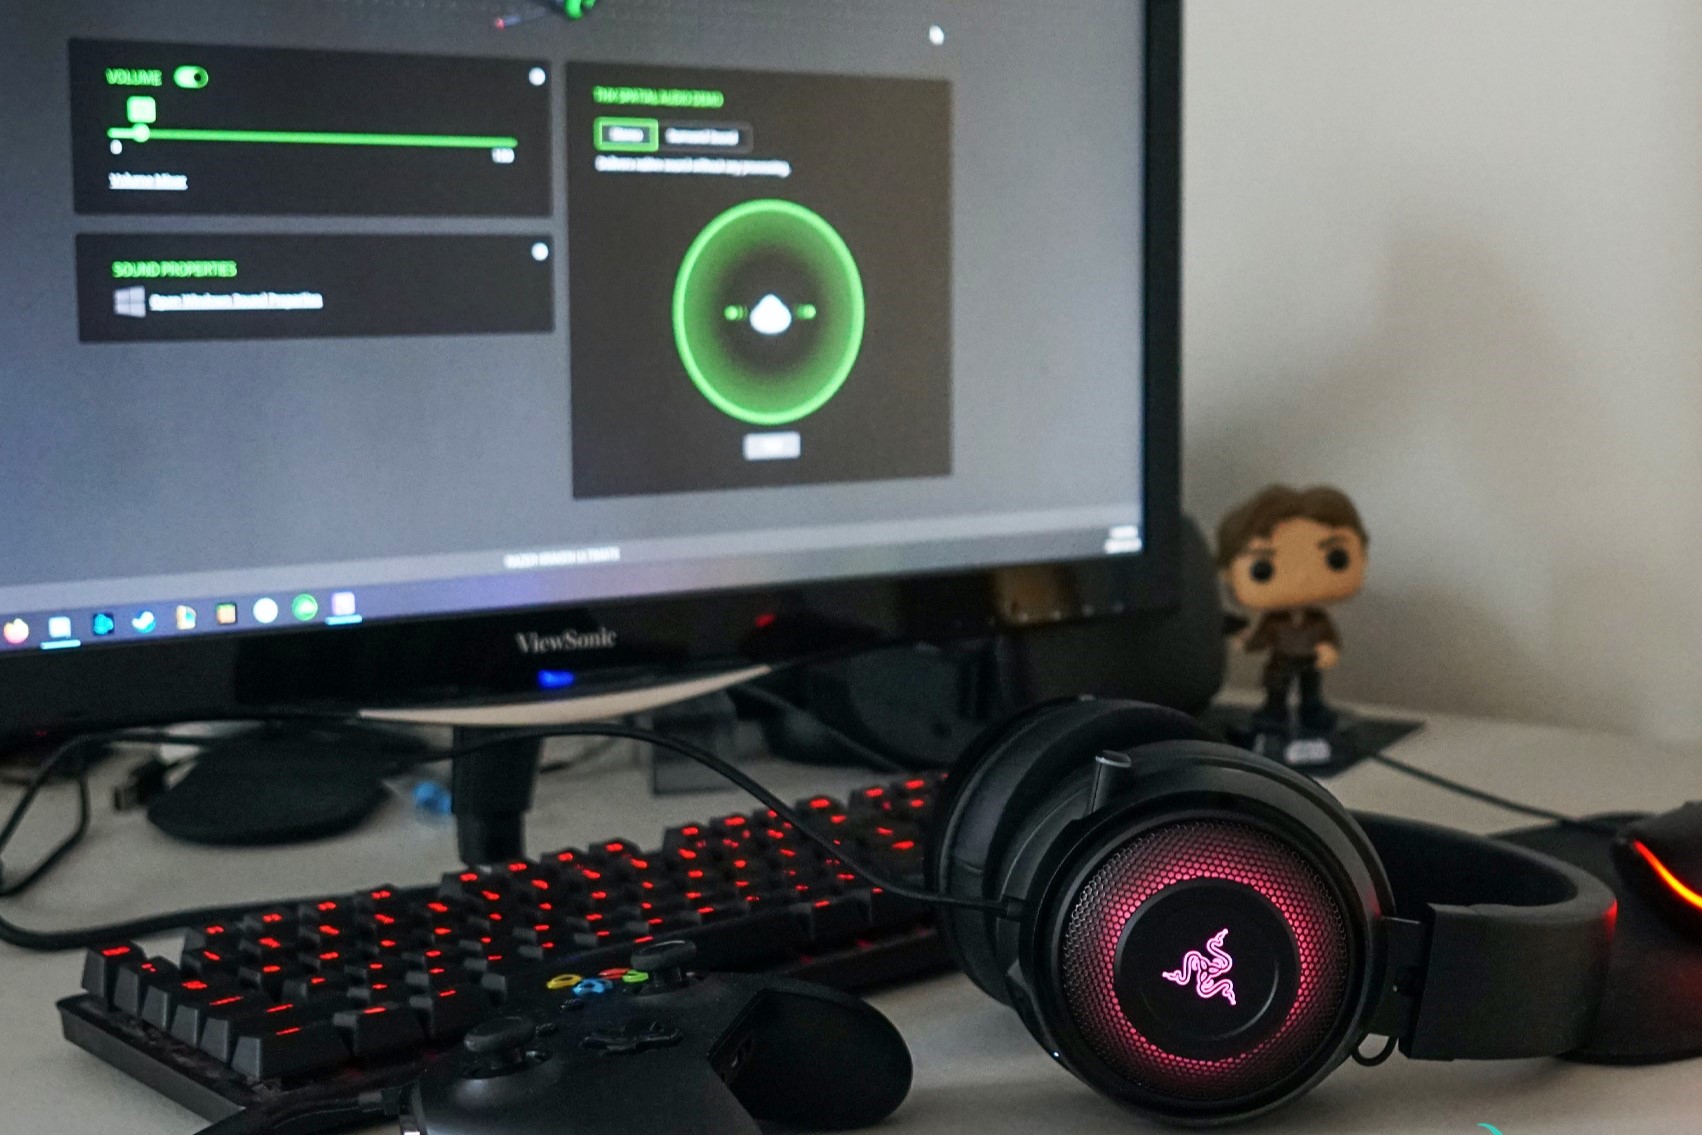 Setting Up A Razer Headset On Your PC